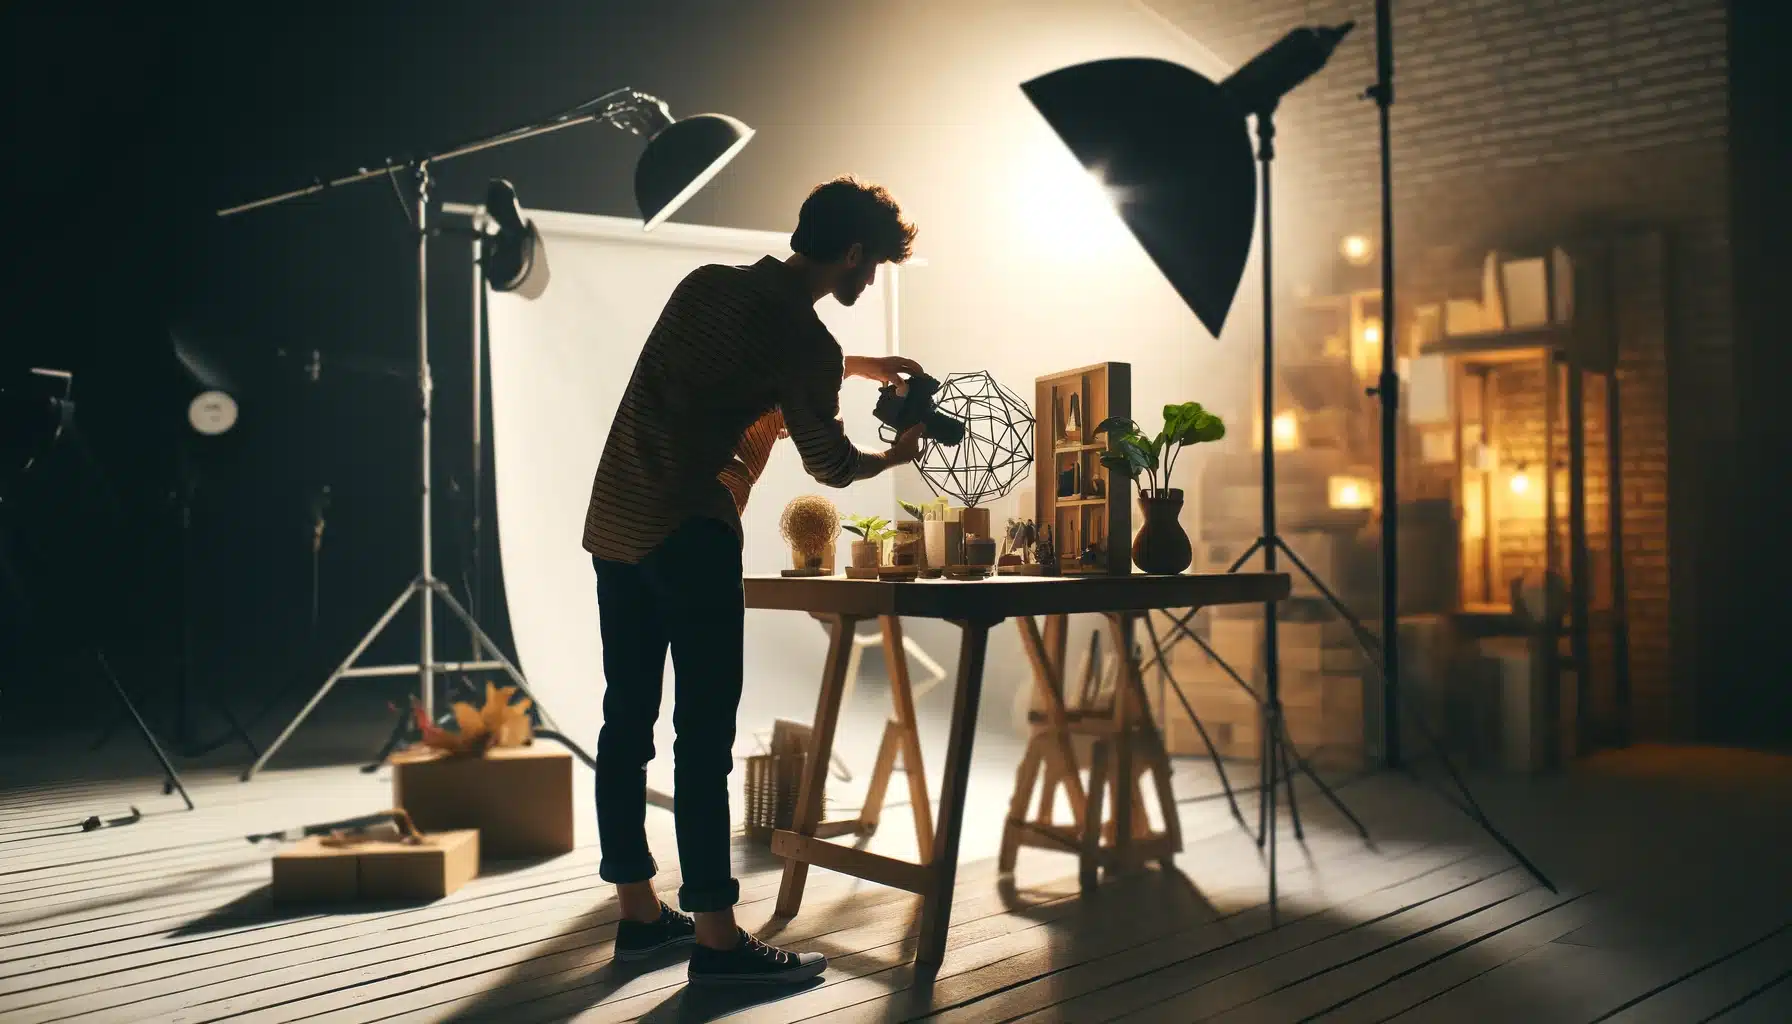 A person working on photo composition in a well-lit photography studio, adjusting objects to achieve a balanced and visually appealing scene. Various photography equipment is visible in the background.